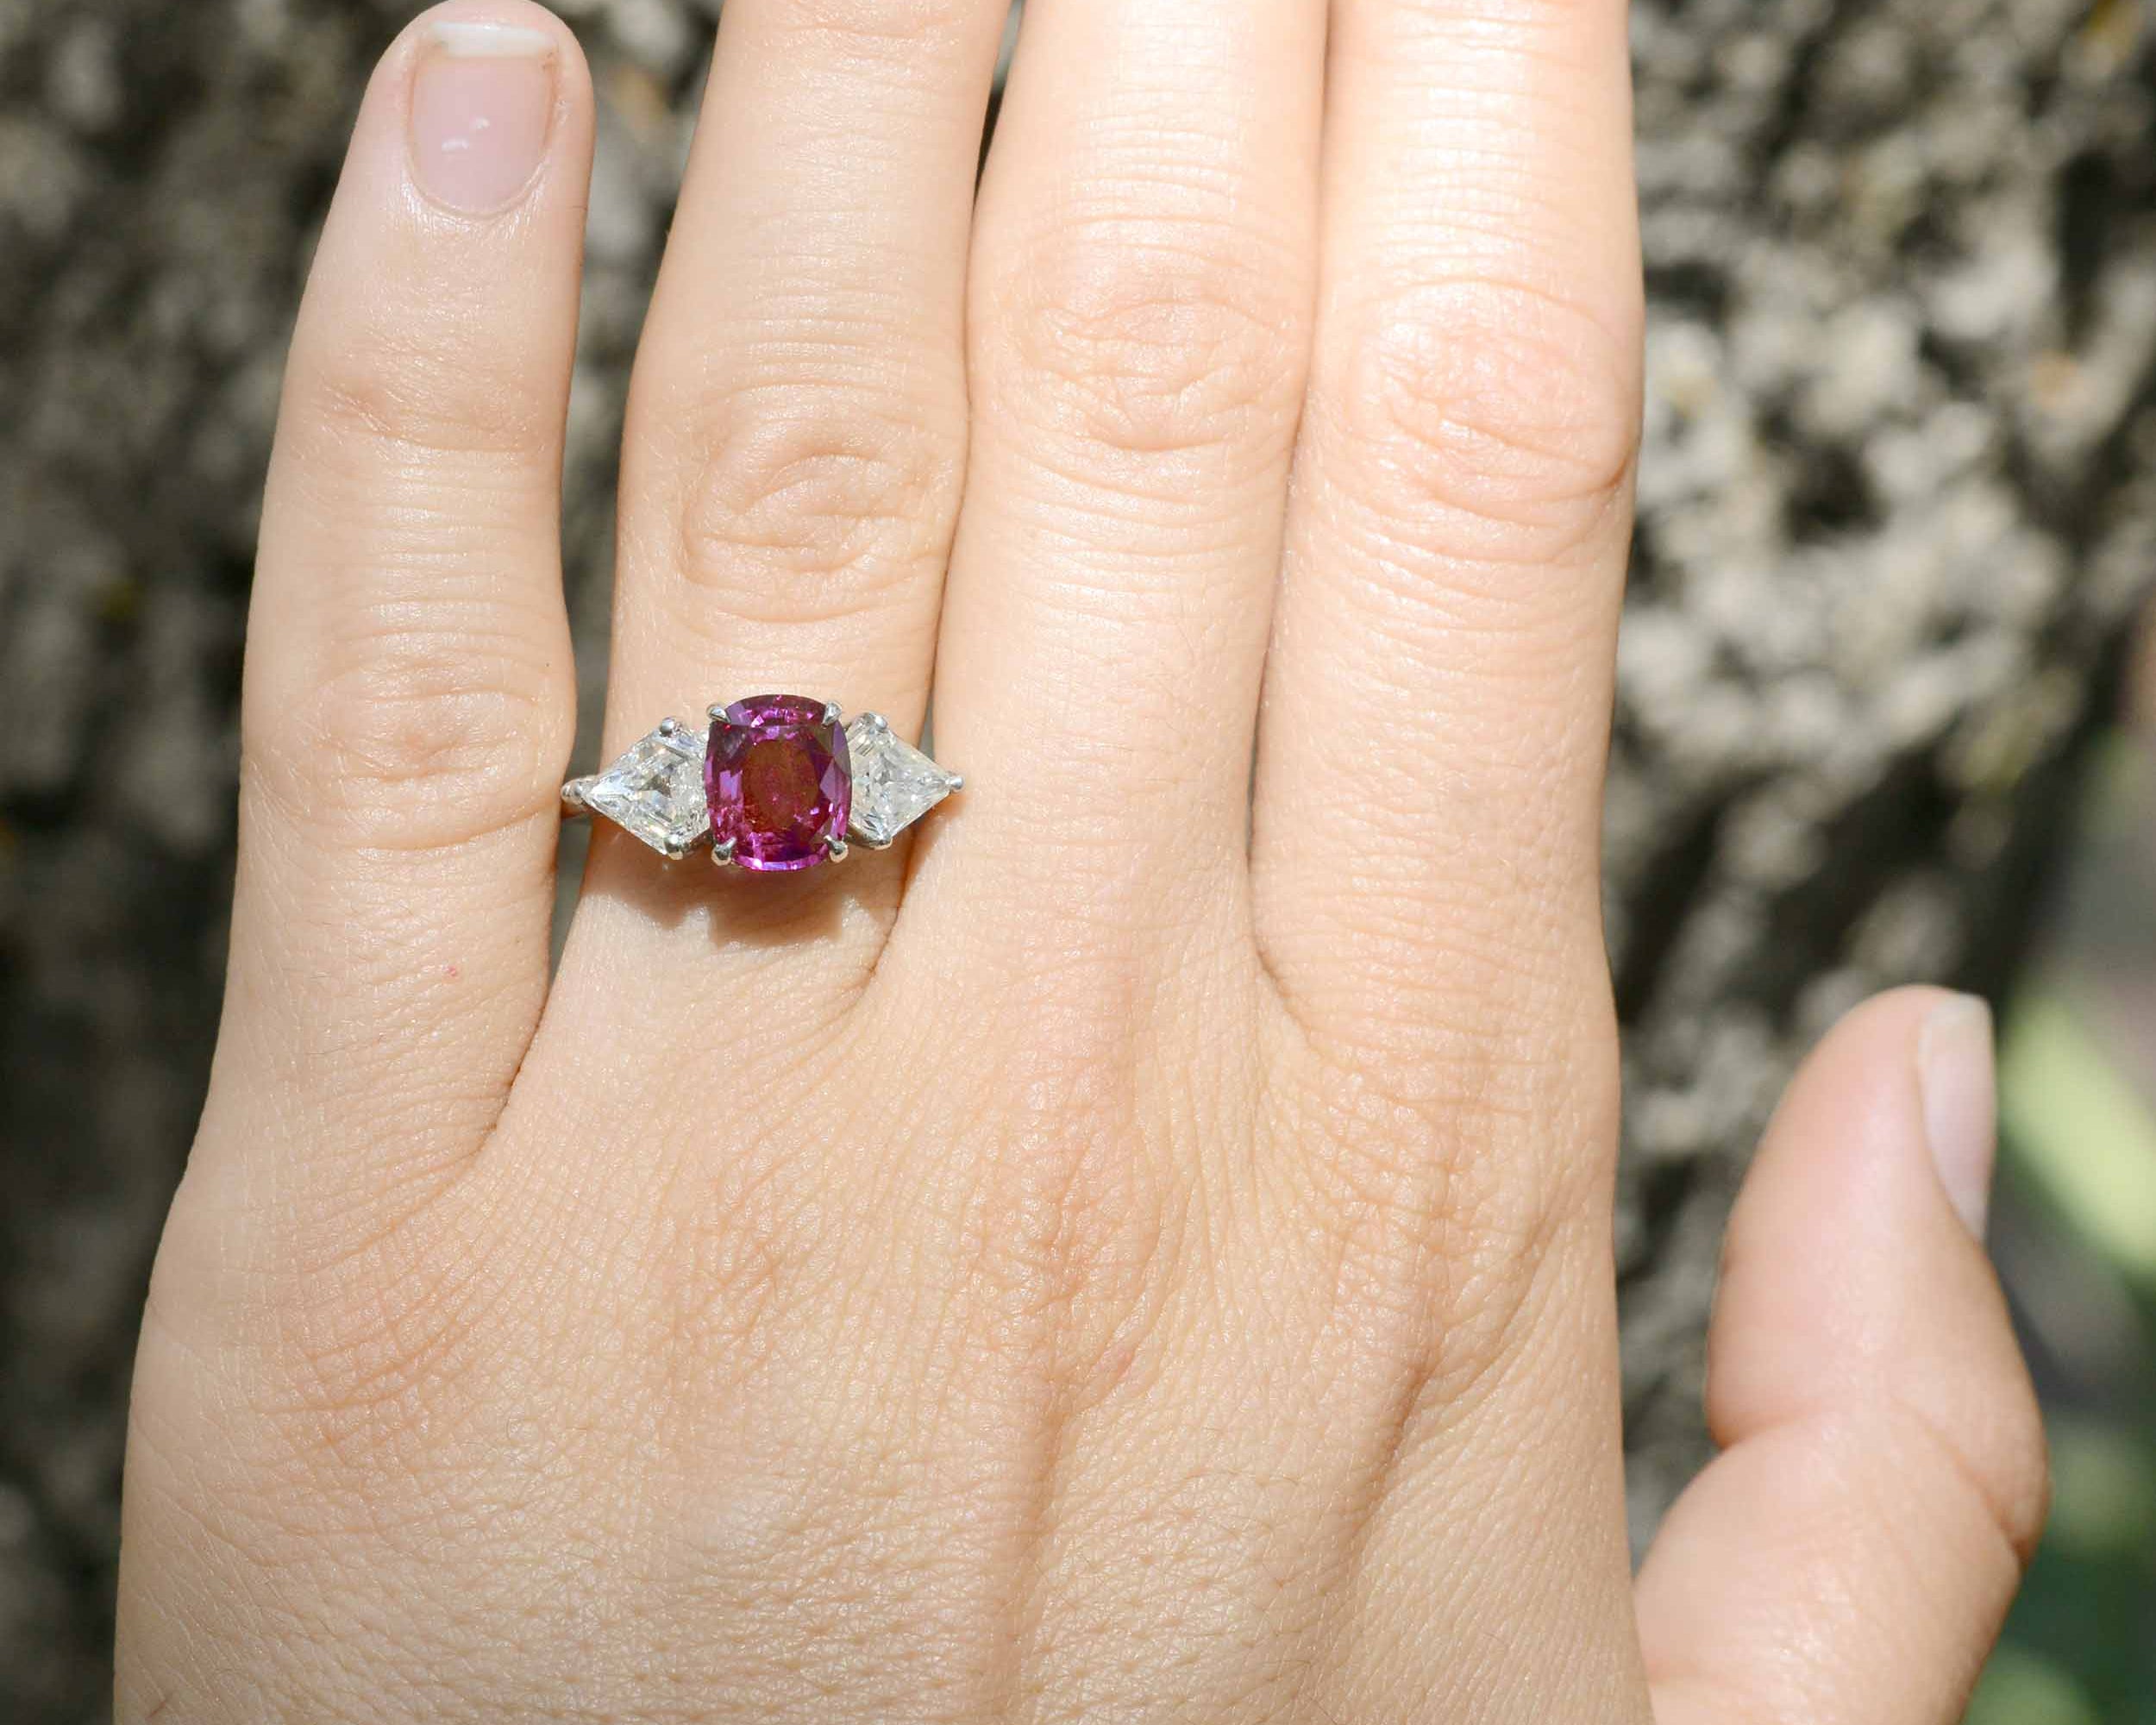 This unique, cushion cut purple pink sapphire has great transparency.